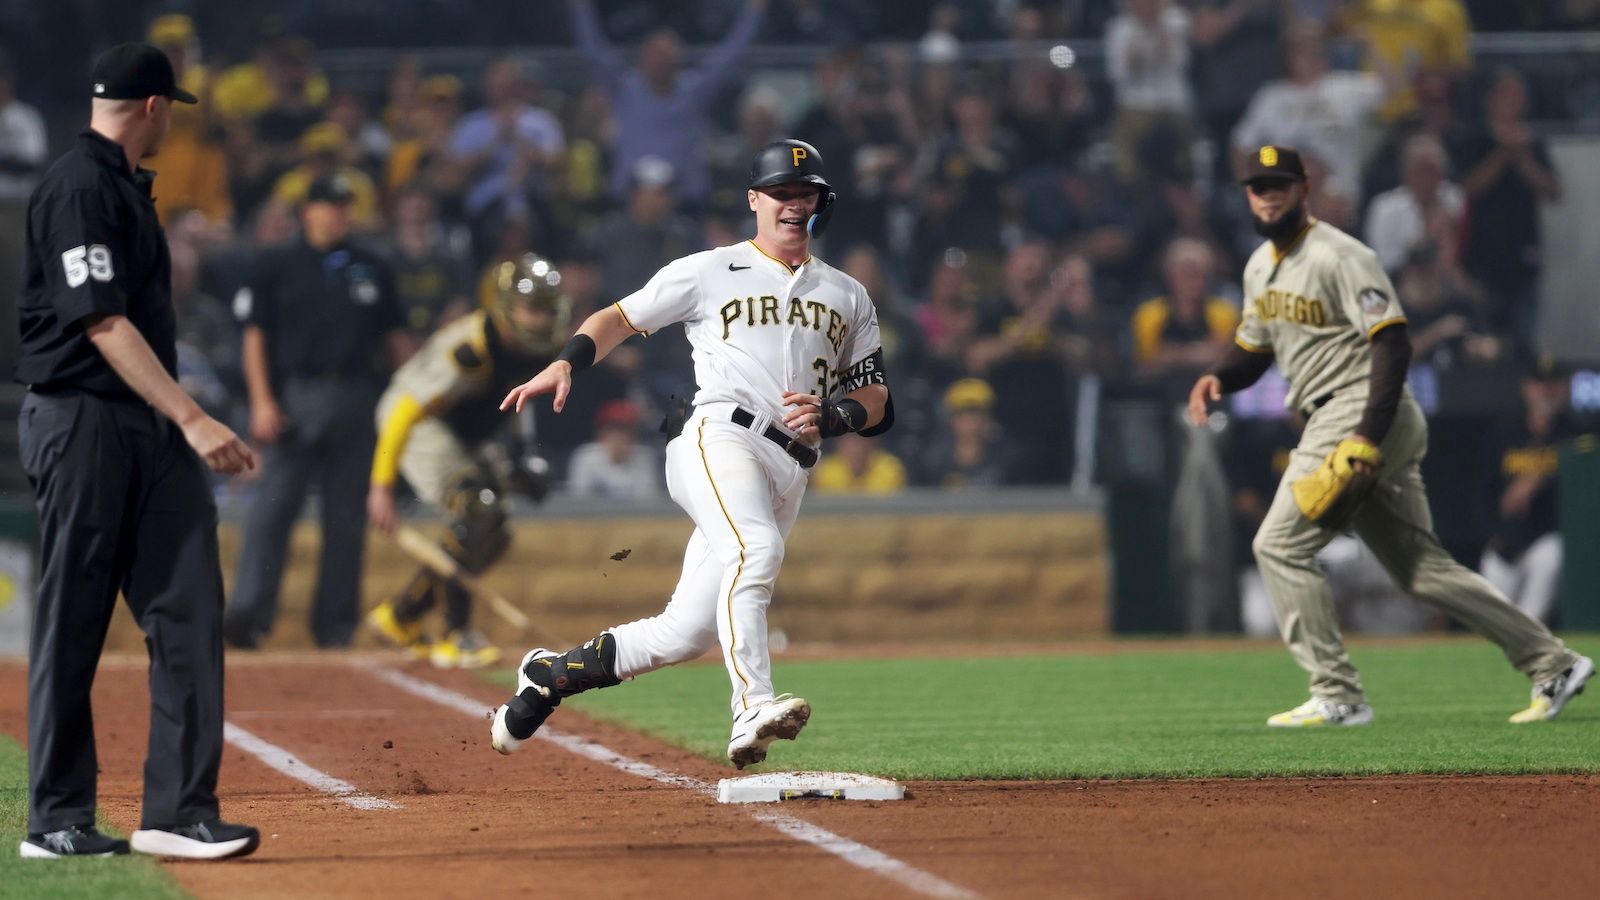 Rookies spark big inning for Pirates, show they can play winning baseball together